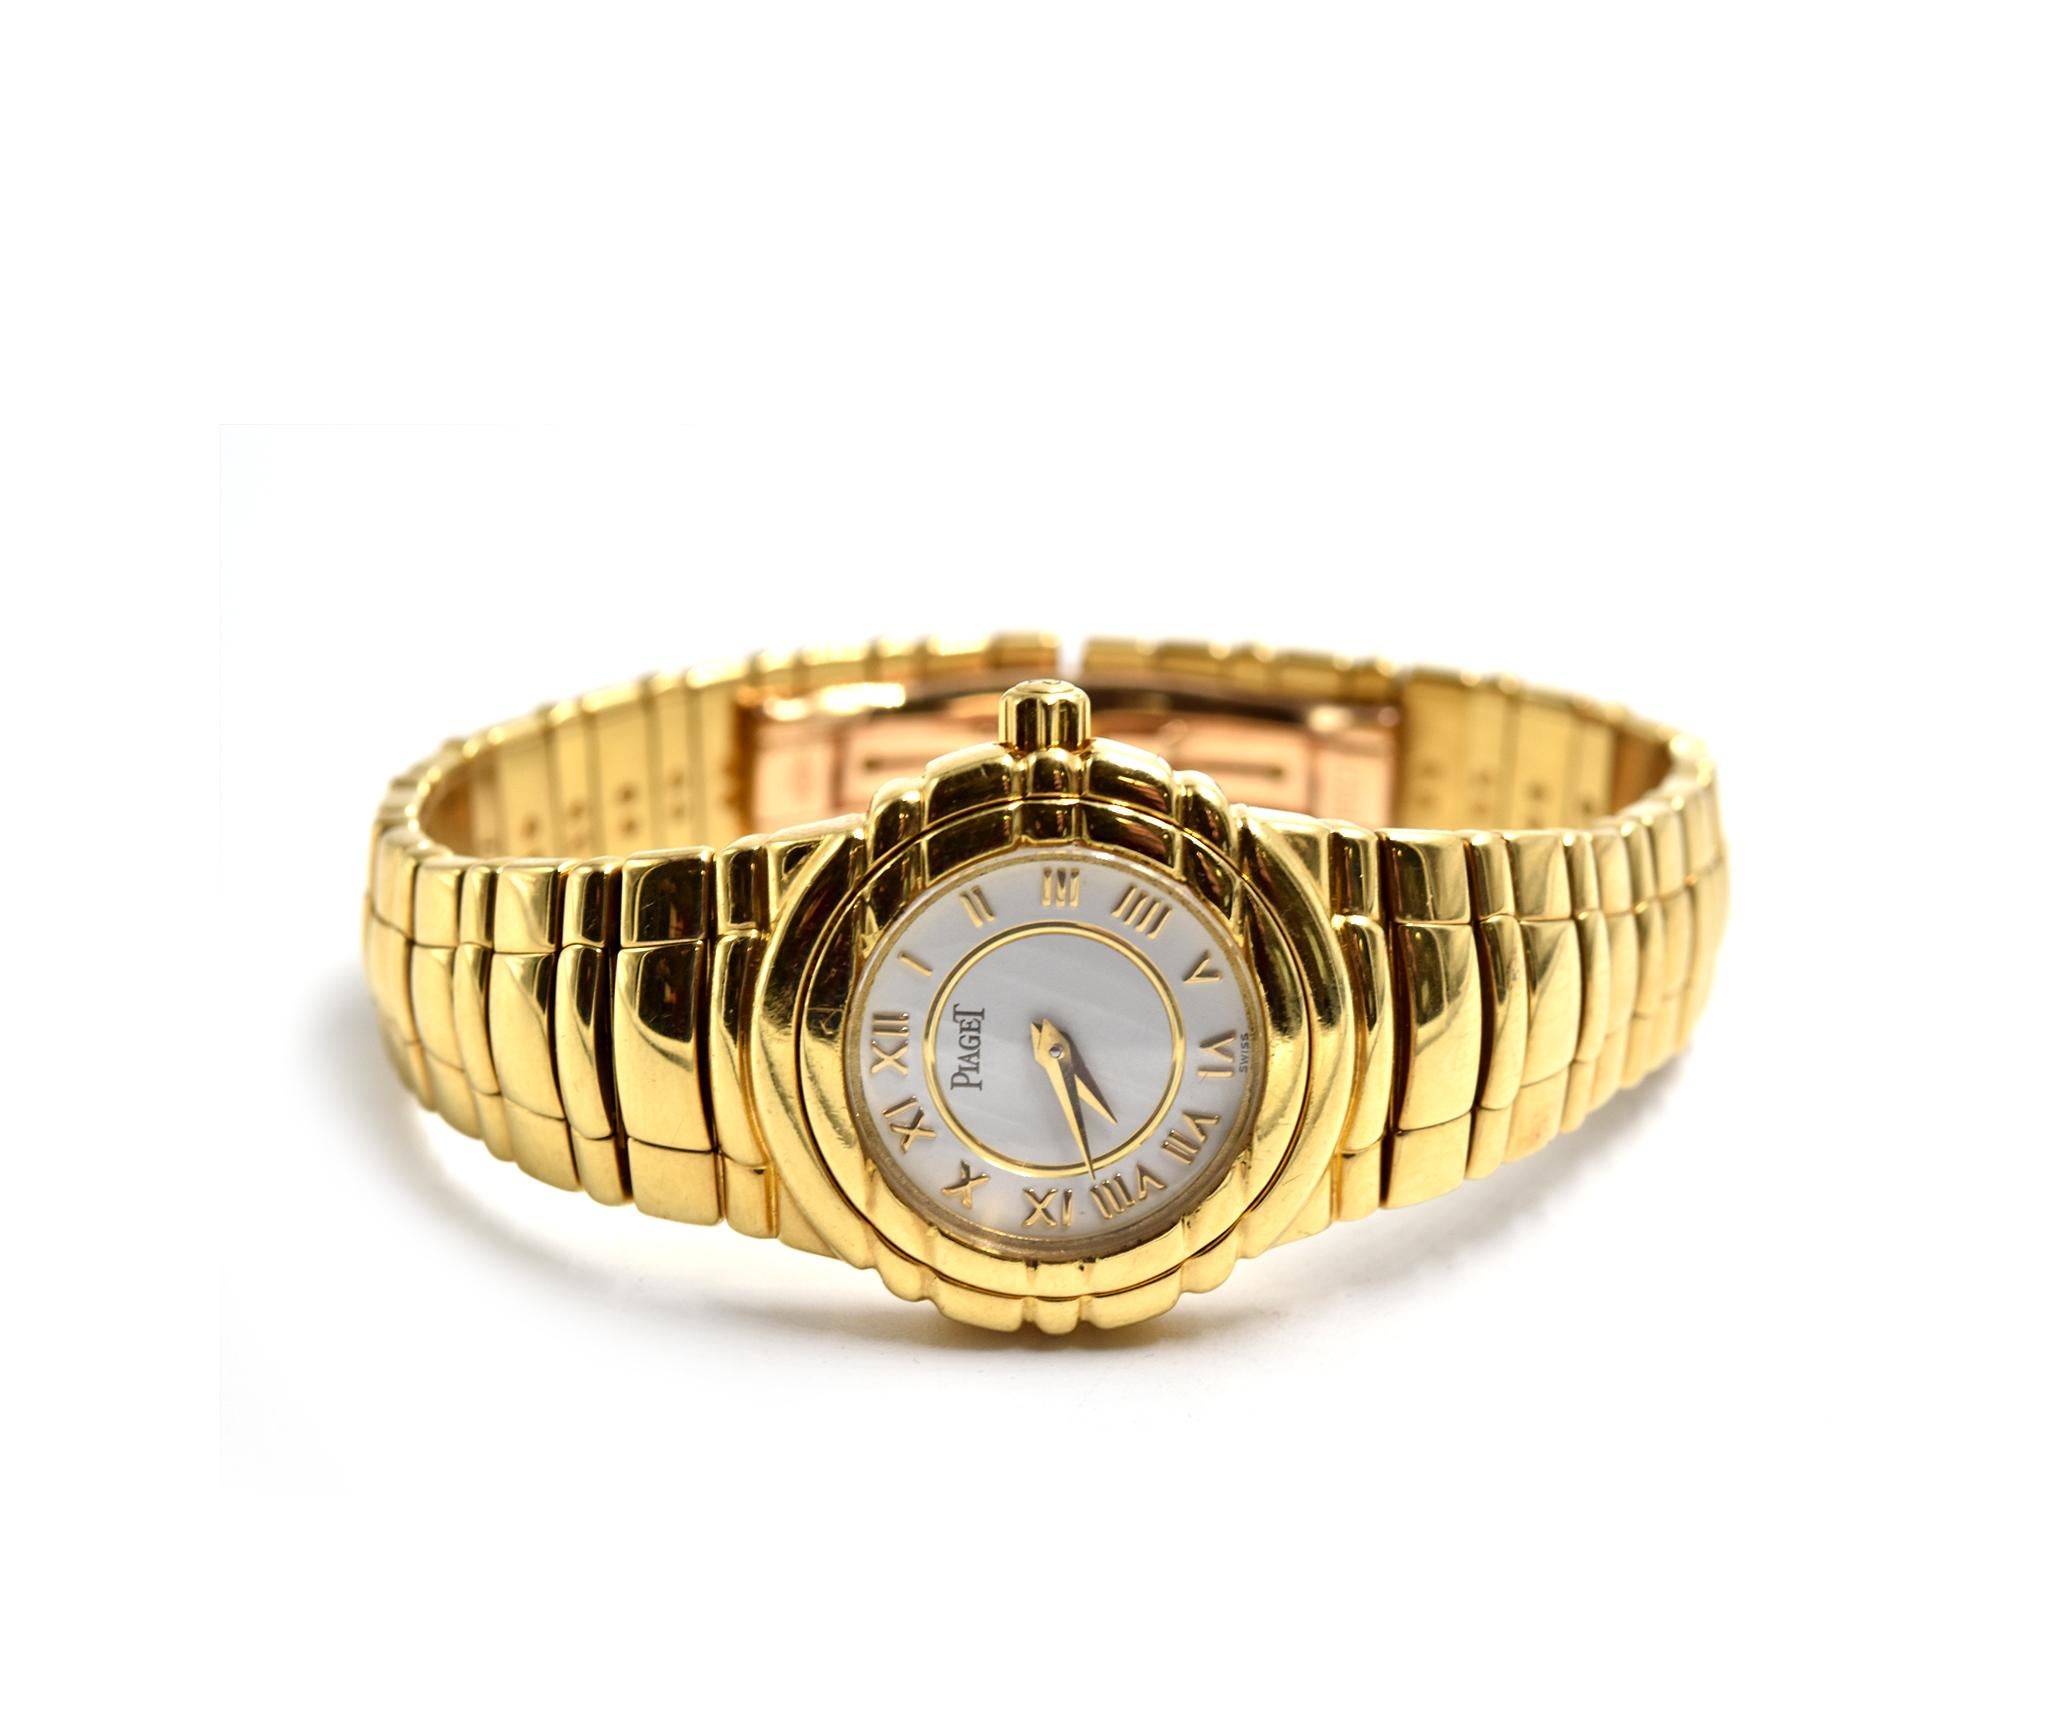 Movement: quartz
Function: hours, minutes
Case: round 25mm 18k yellow gold case with fixed bezel, sapphire crystal, pull/push crown, water resistant
Dial: white roman numeral dial, gold roman numerals, gold hands
Band: 18k yellow gold link bracelet